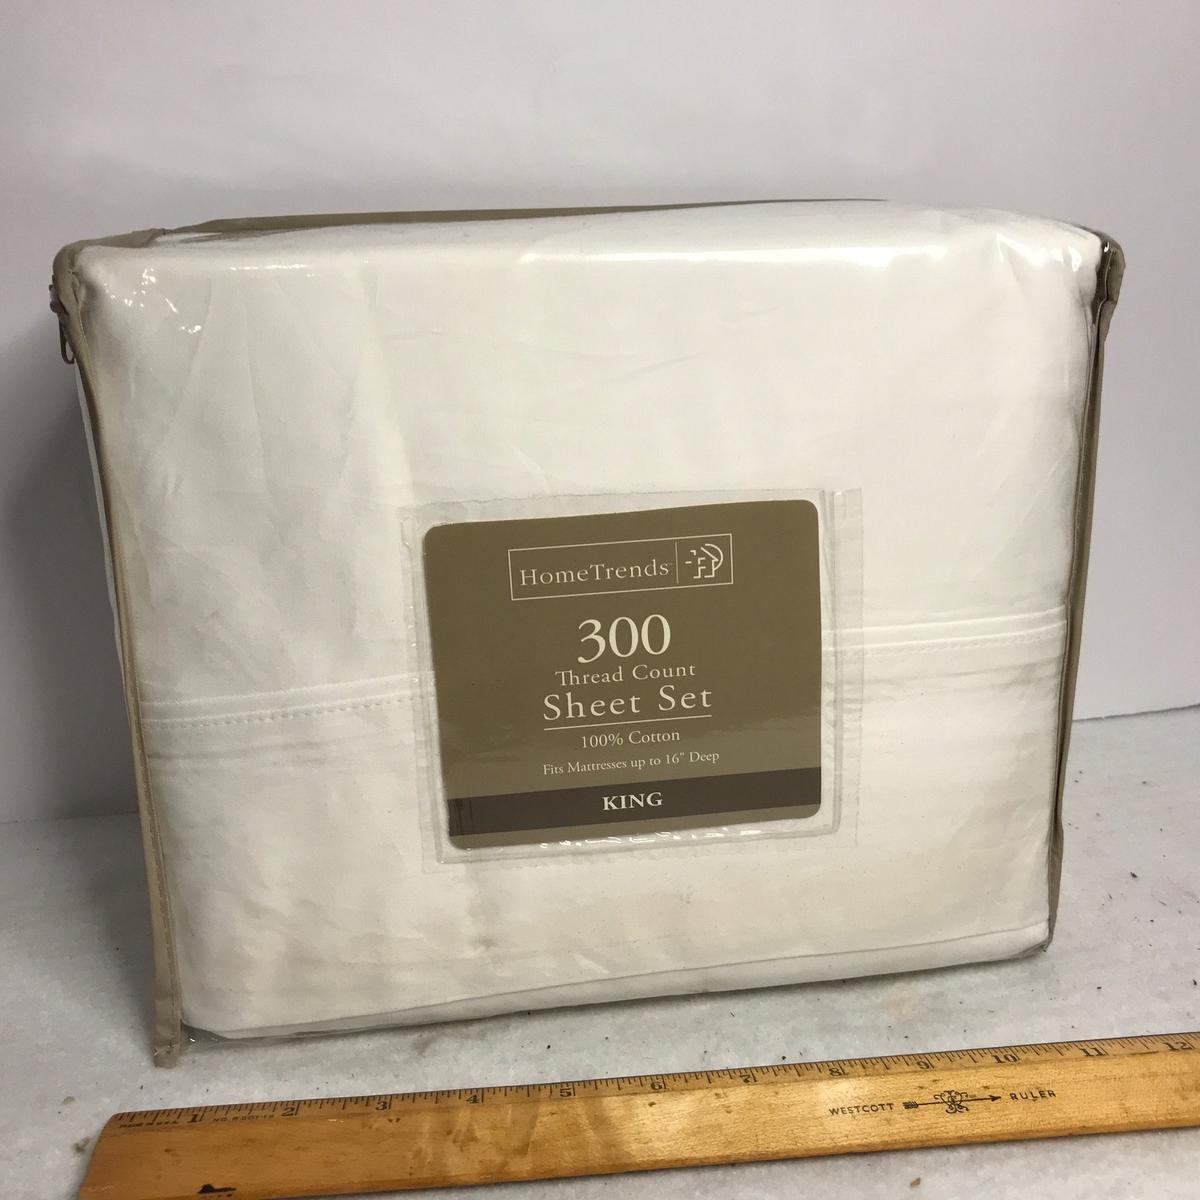 NEW Home Trends King Size 300 Thread Count Sheets Set